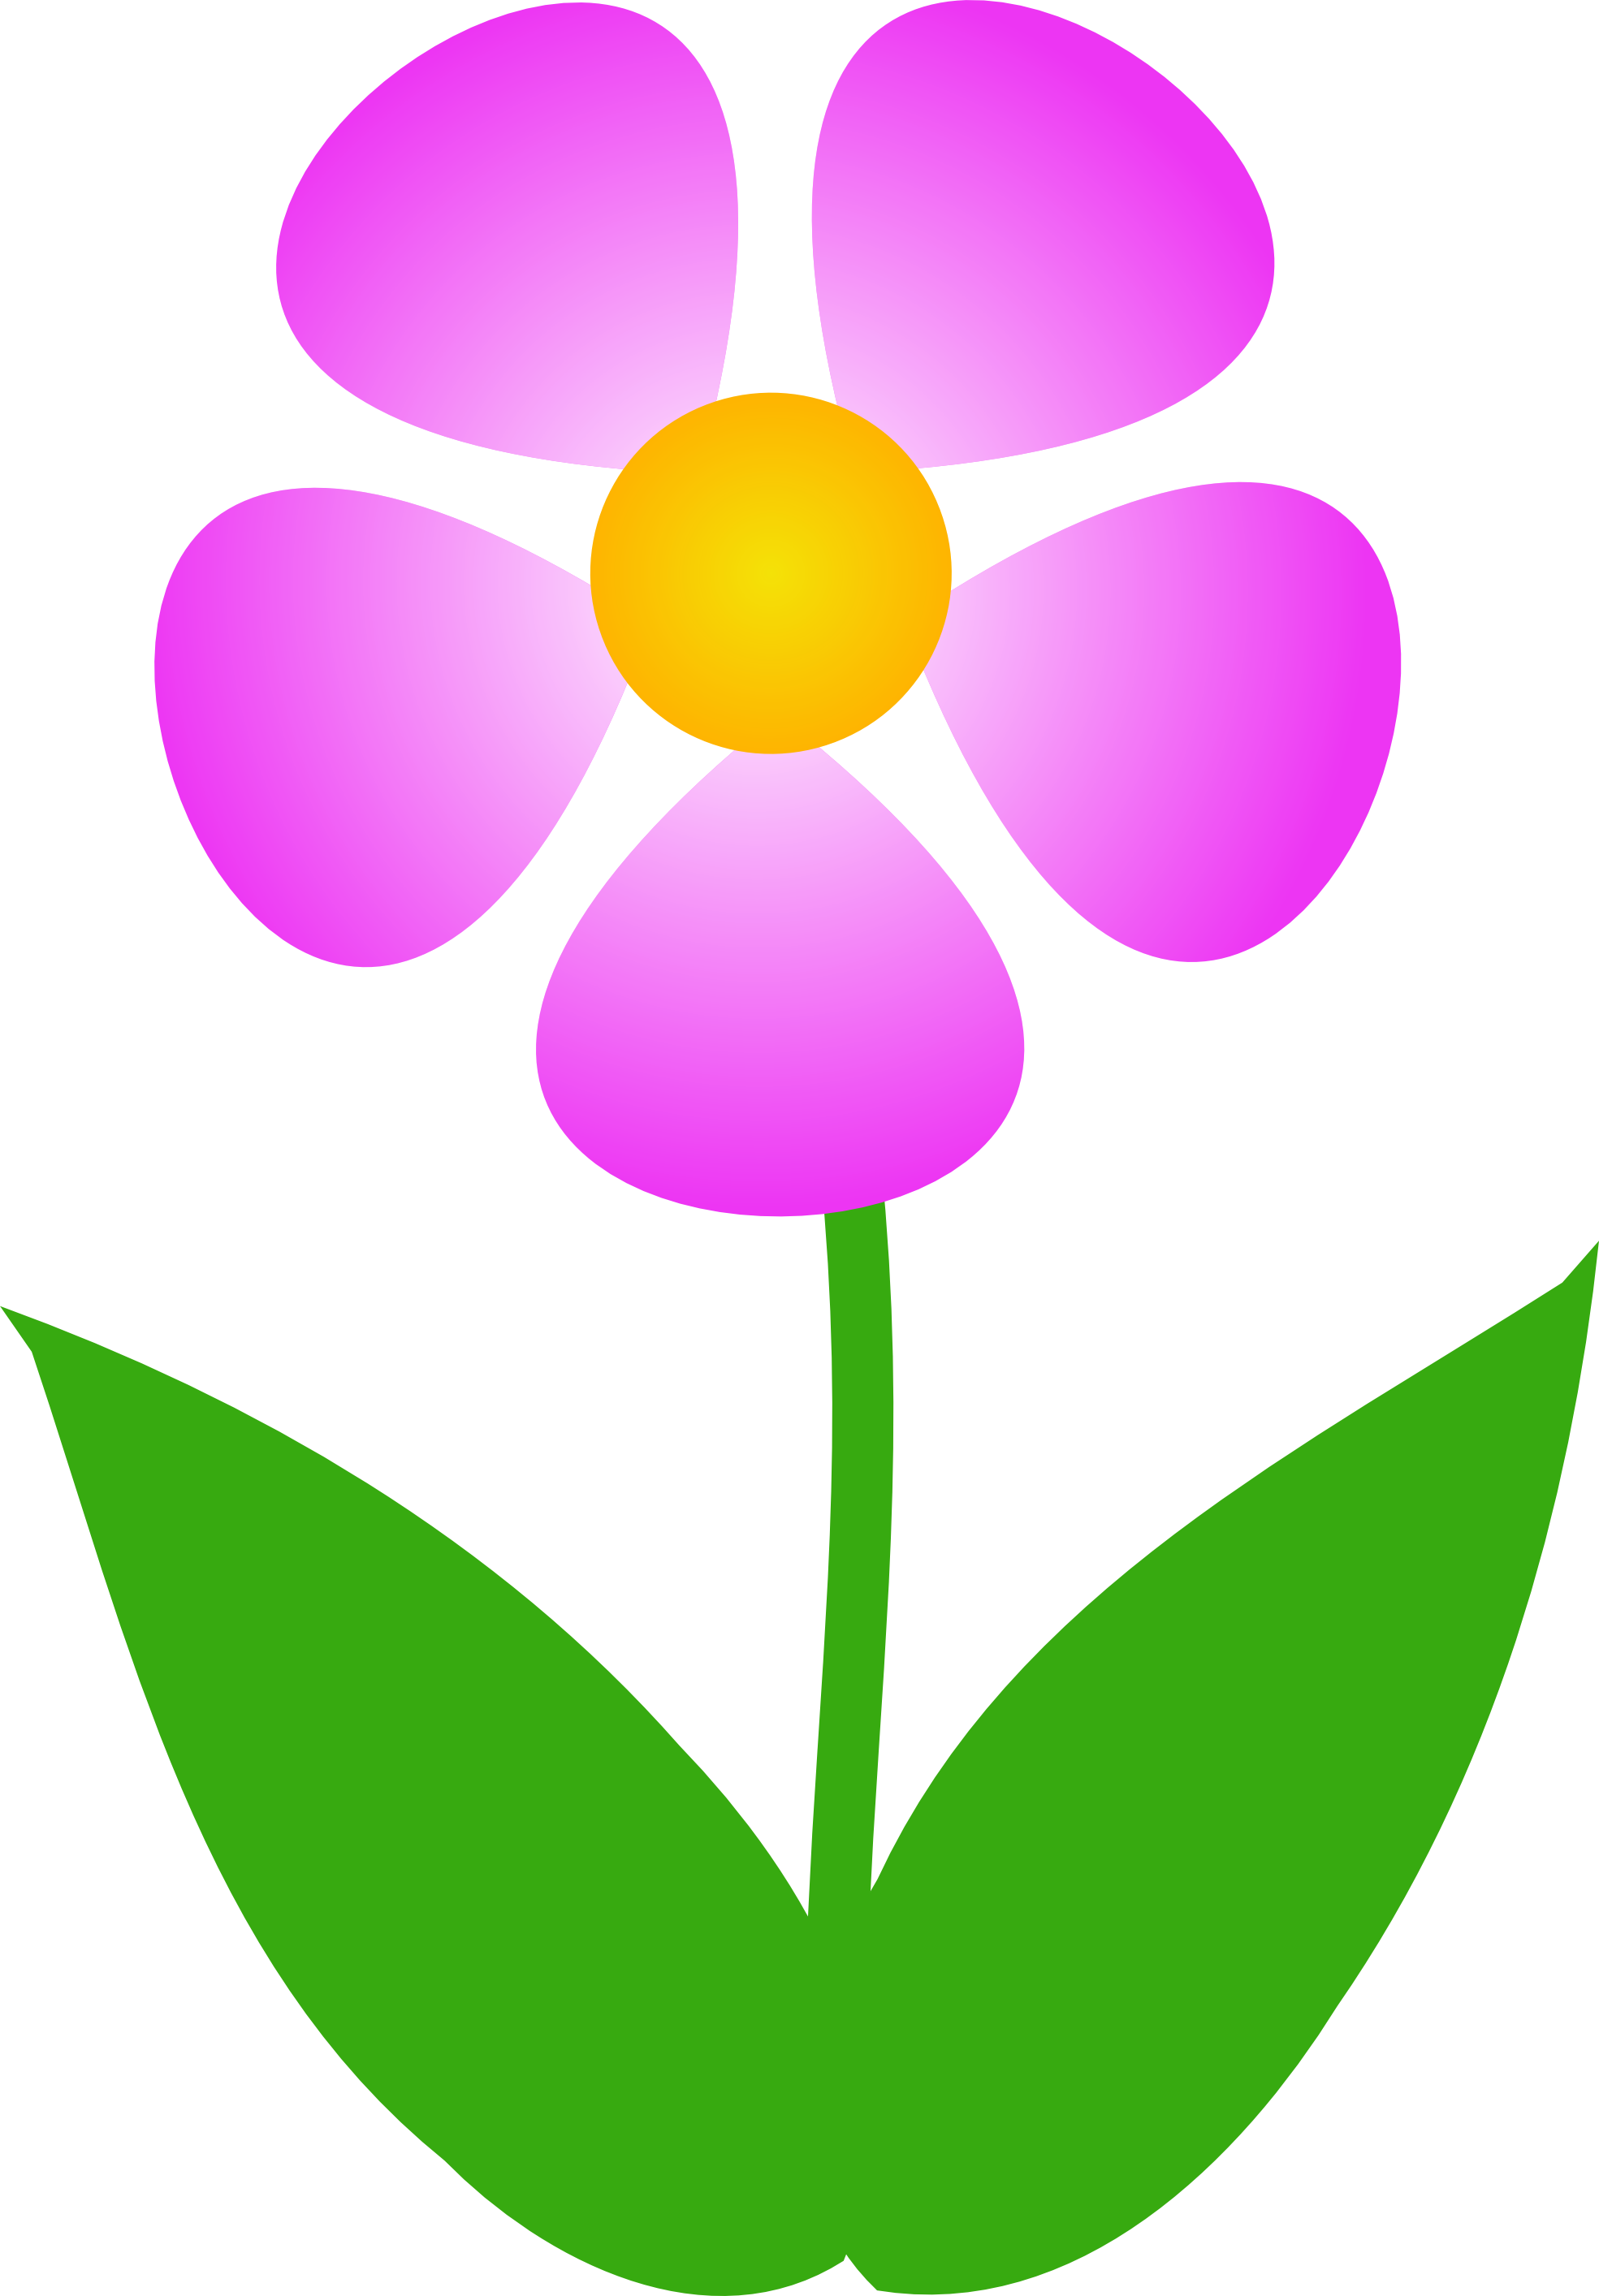 Free clipart images of flower - Clip Art Of Flowers